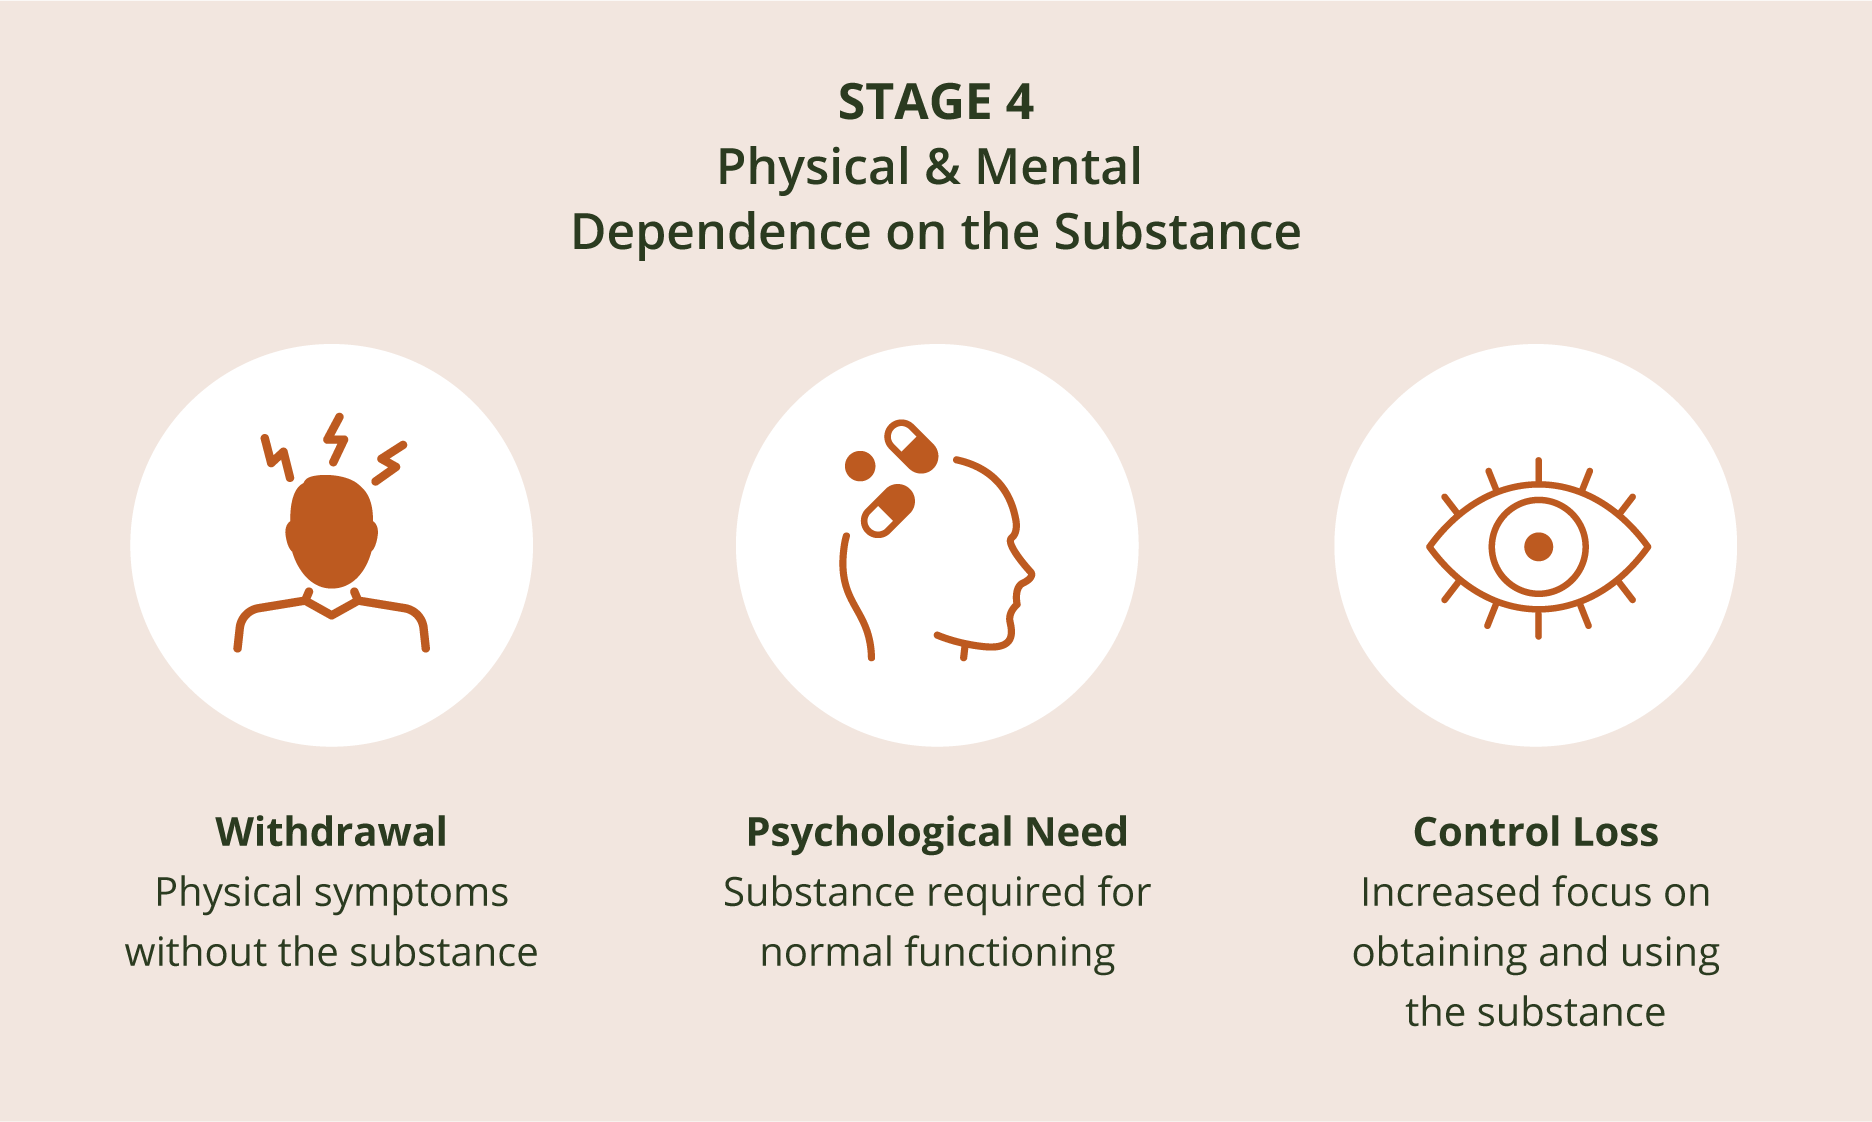 Physical & Mental Dependence of the Substance